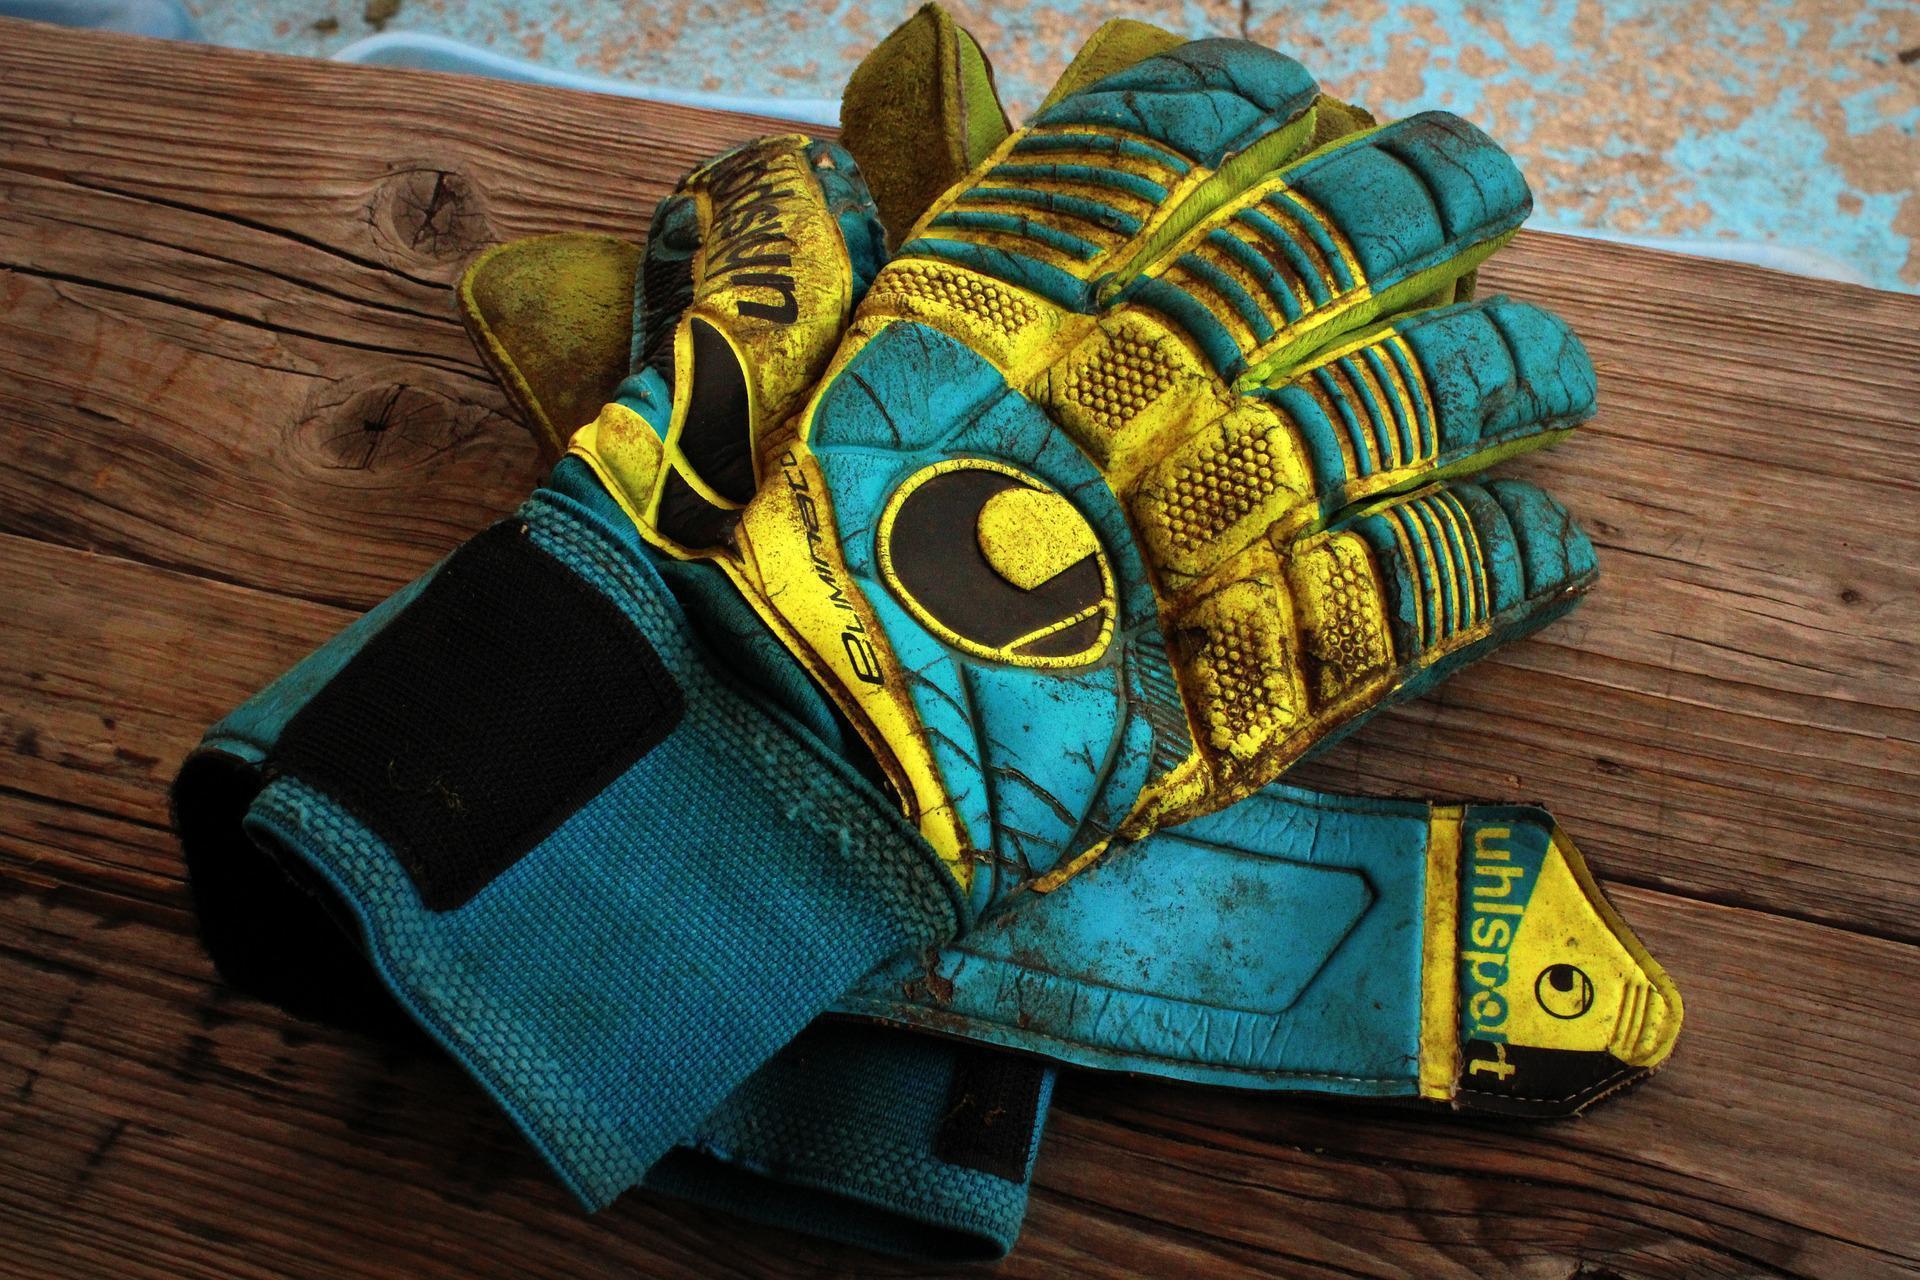 Extremely dirty blue and yellow Uhlsport brand goalkeeper gloves